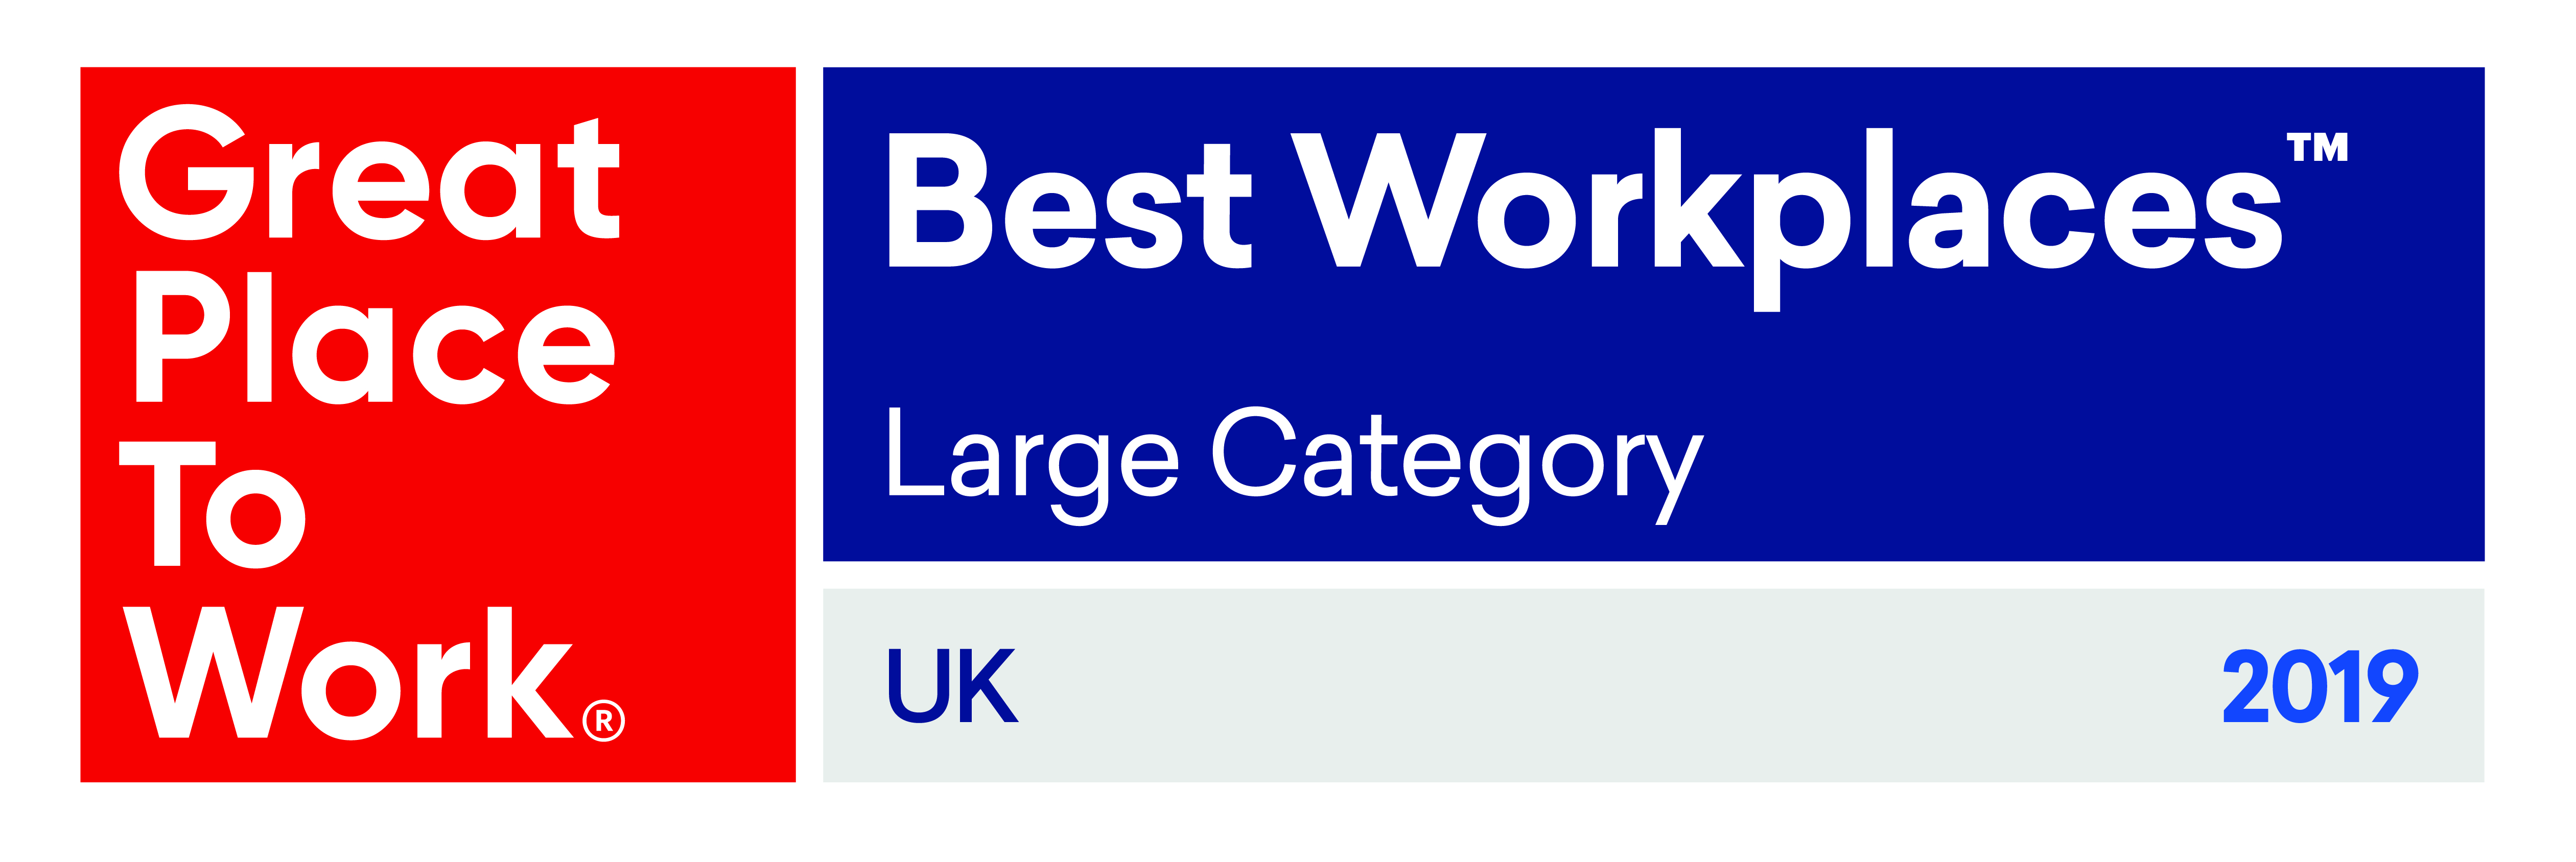 GPTW Best Workplaces Large UK CMYK 2019 - Home Page